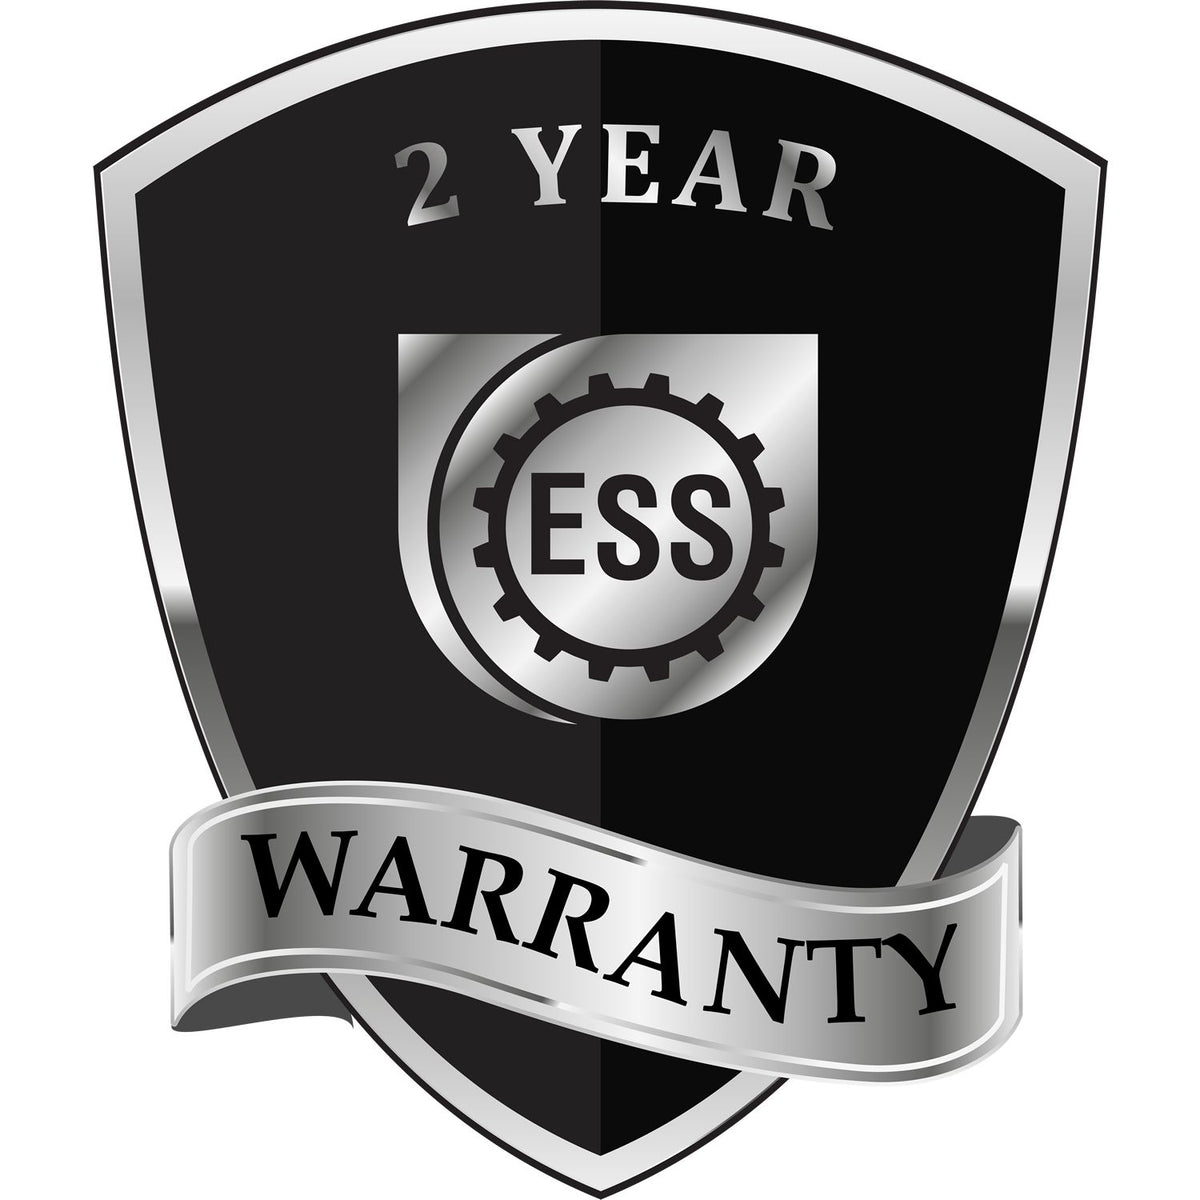 A badge or emblem showing a warranty icon for the State of Nebraska Long Reach Architectural Embossing Seal